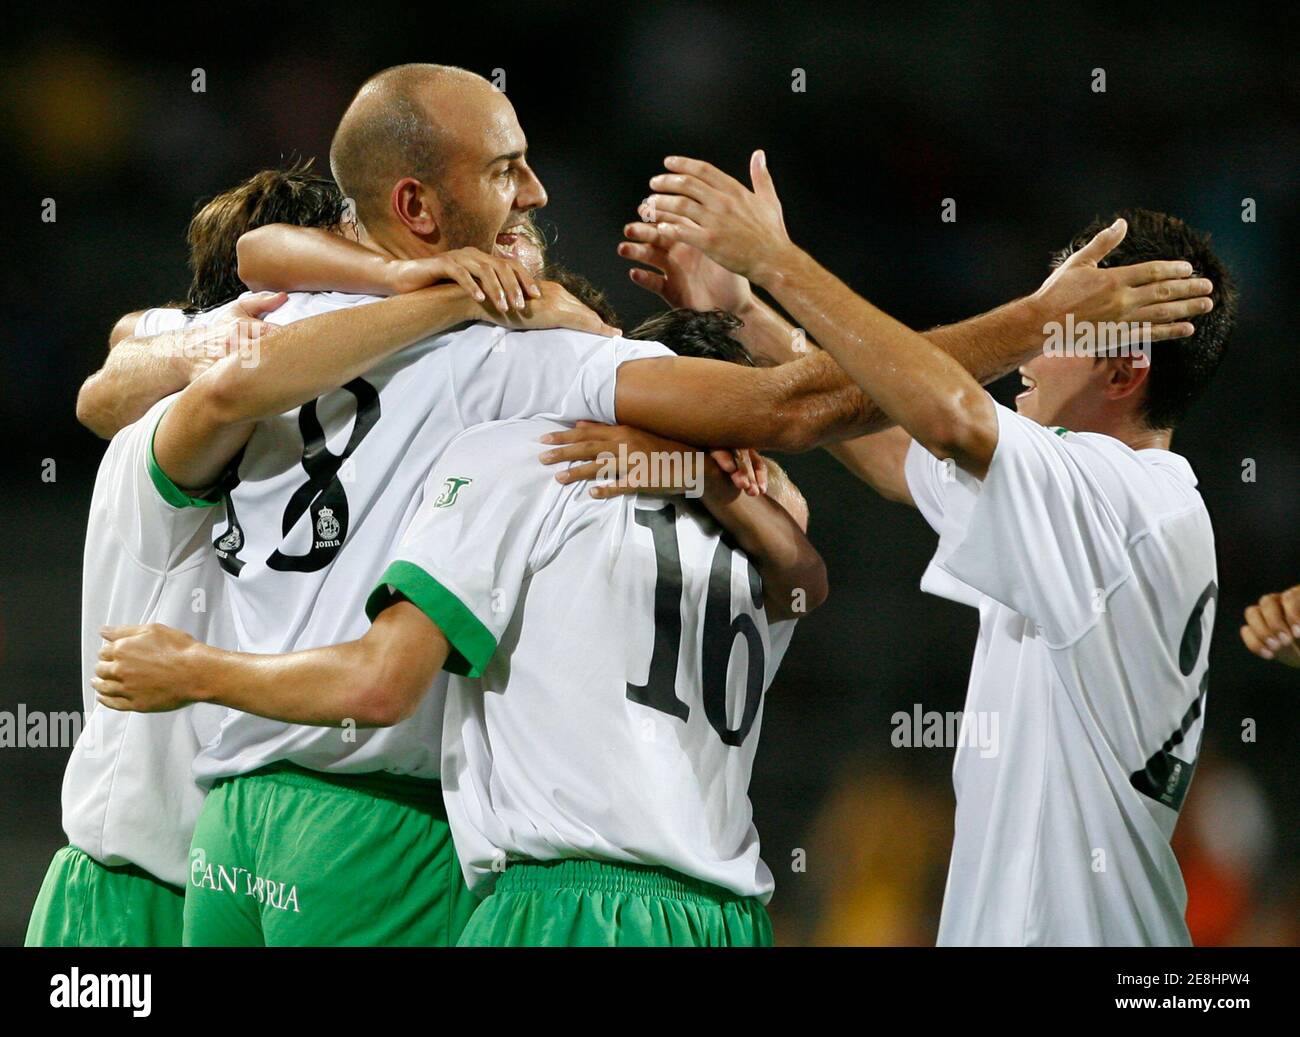 Spanish club Real Racing Santander's Gonzalo Colsa Albendea (2nd L) celebrates with his teammates after scoring a goal during the 2007 Peace Cup Korea tournament with British club Bolton Wanderers at the Goyang Stadium in Goyang, near Seoul, July 17, 2007.  REUTERS/Jo Yong-Hak (SOUTH KOREA) Stock Photo